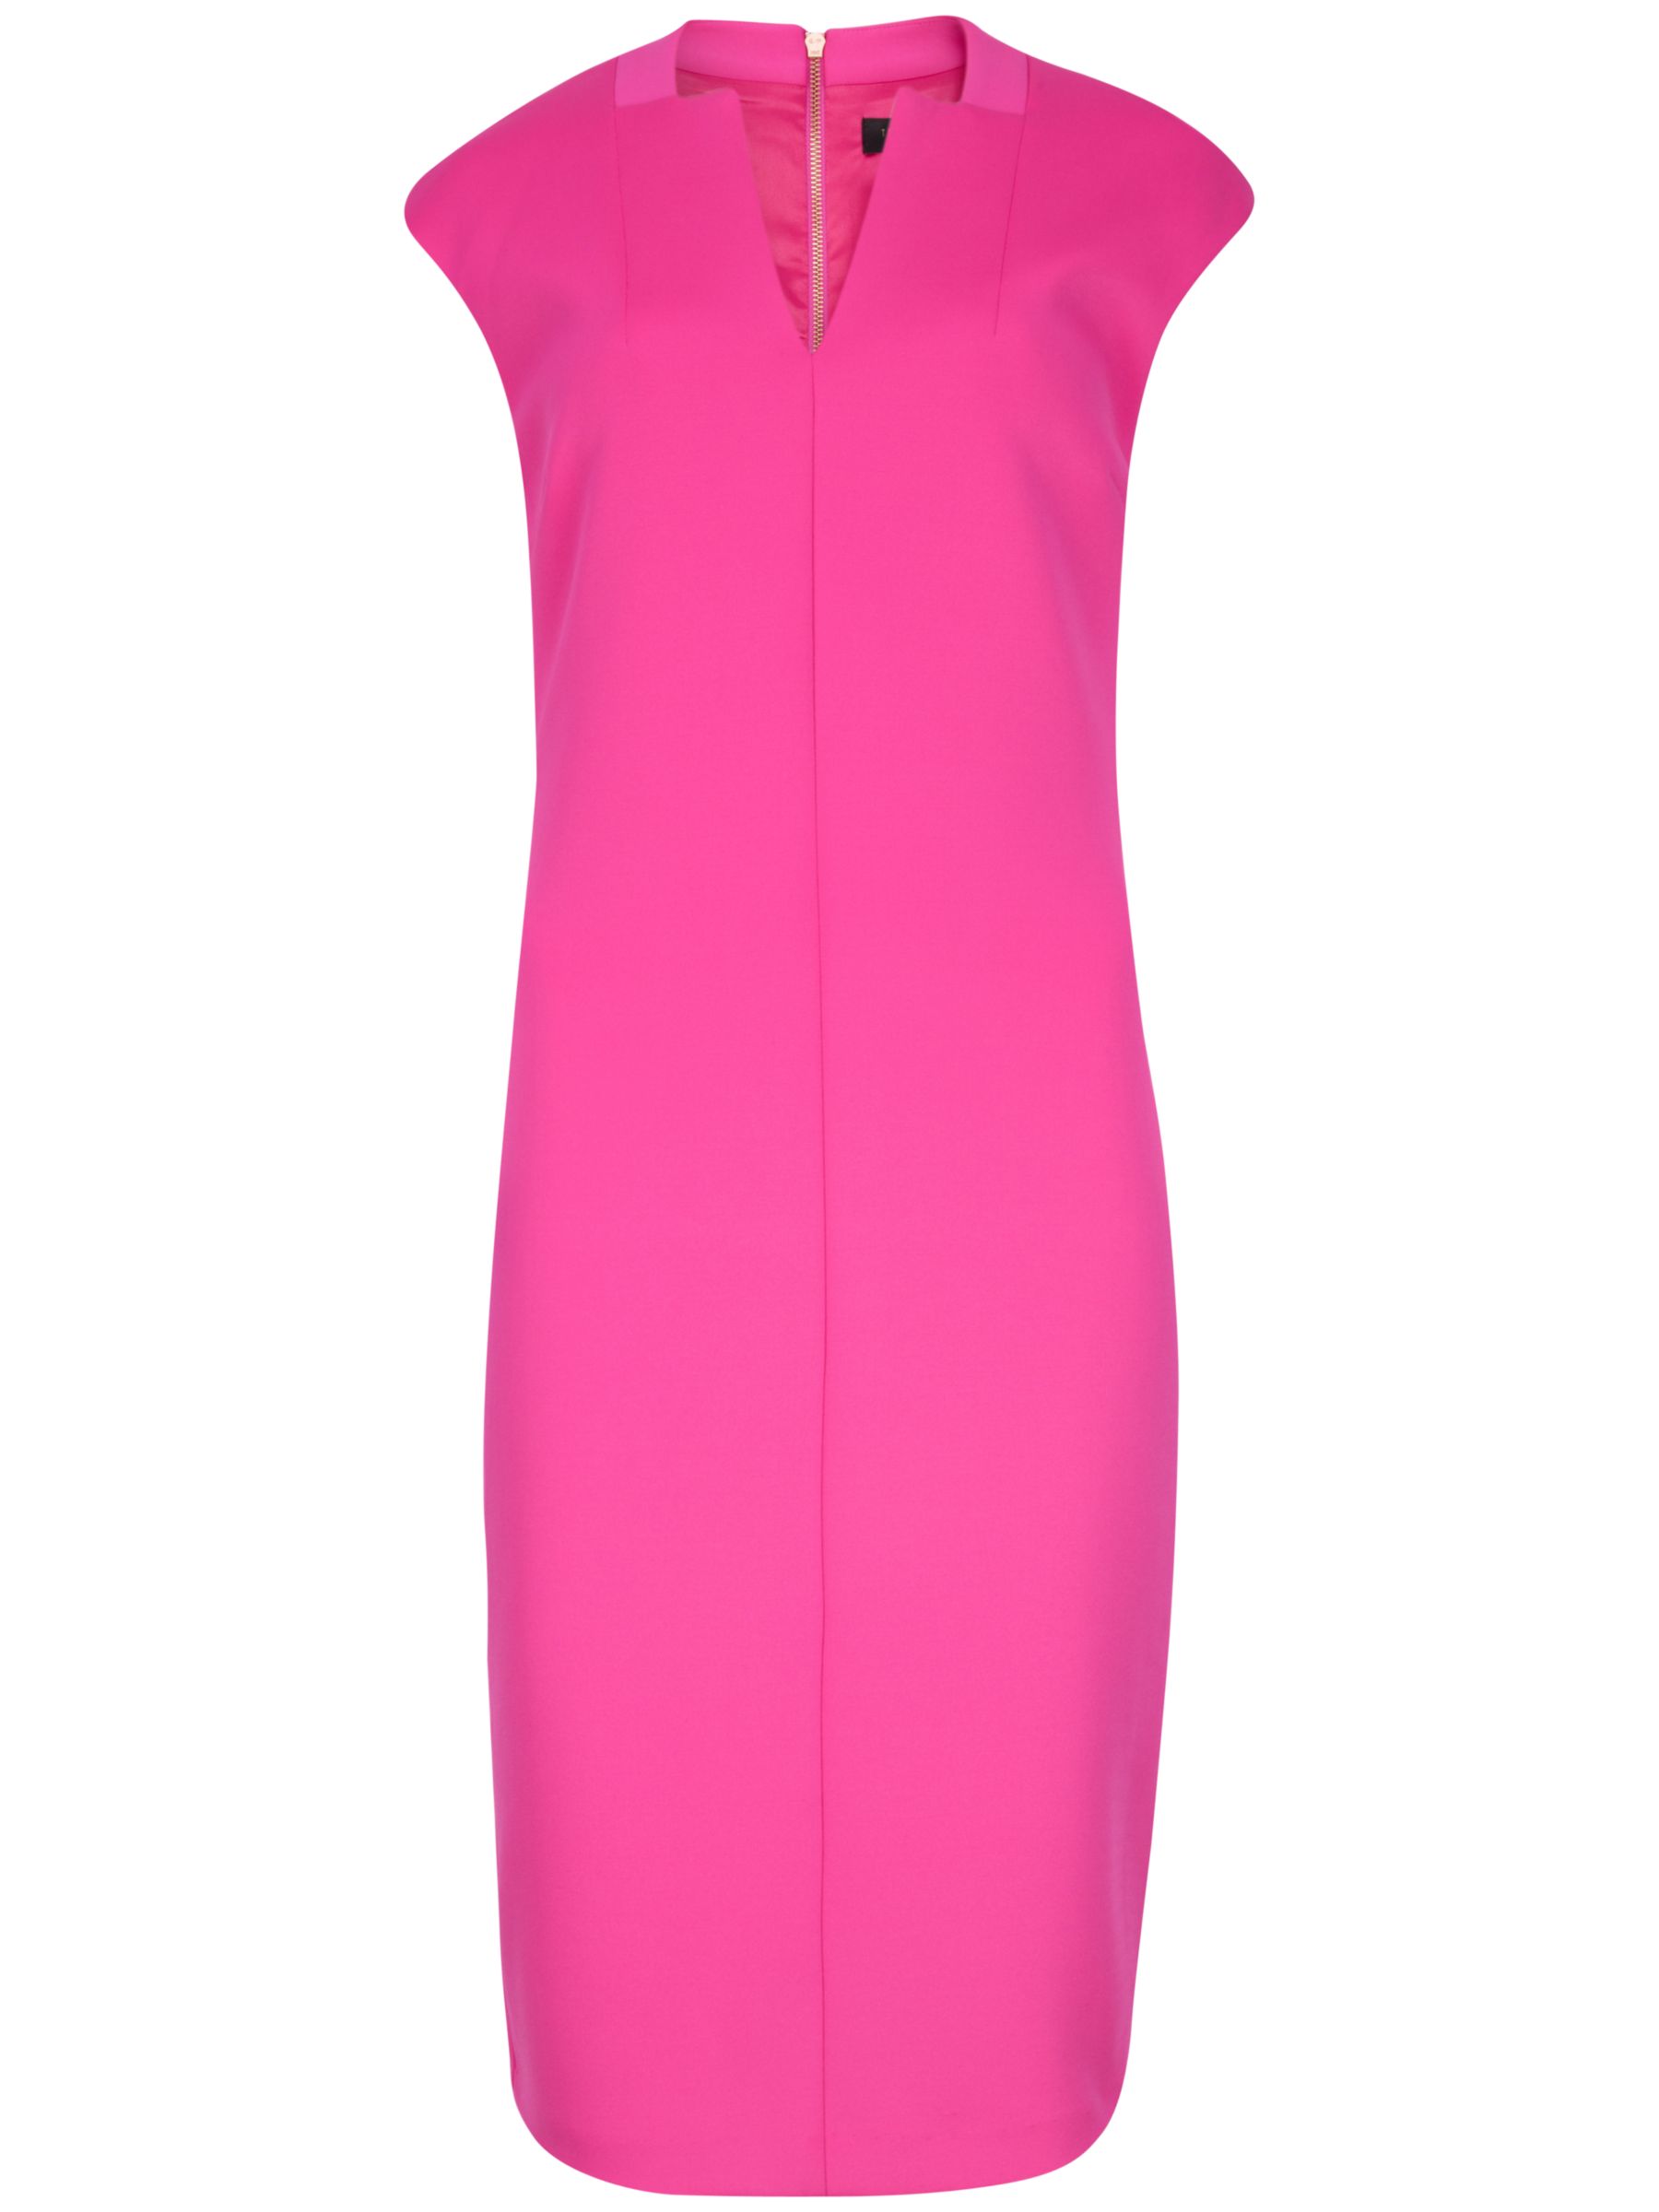 Ted Baker Diah Notch Neck Bodycon Dress, Bright Pink at John Lewis ...